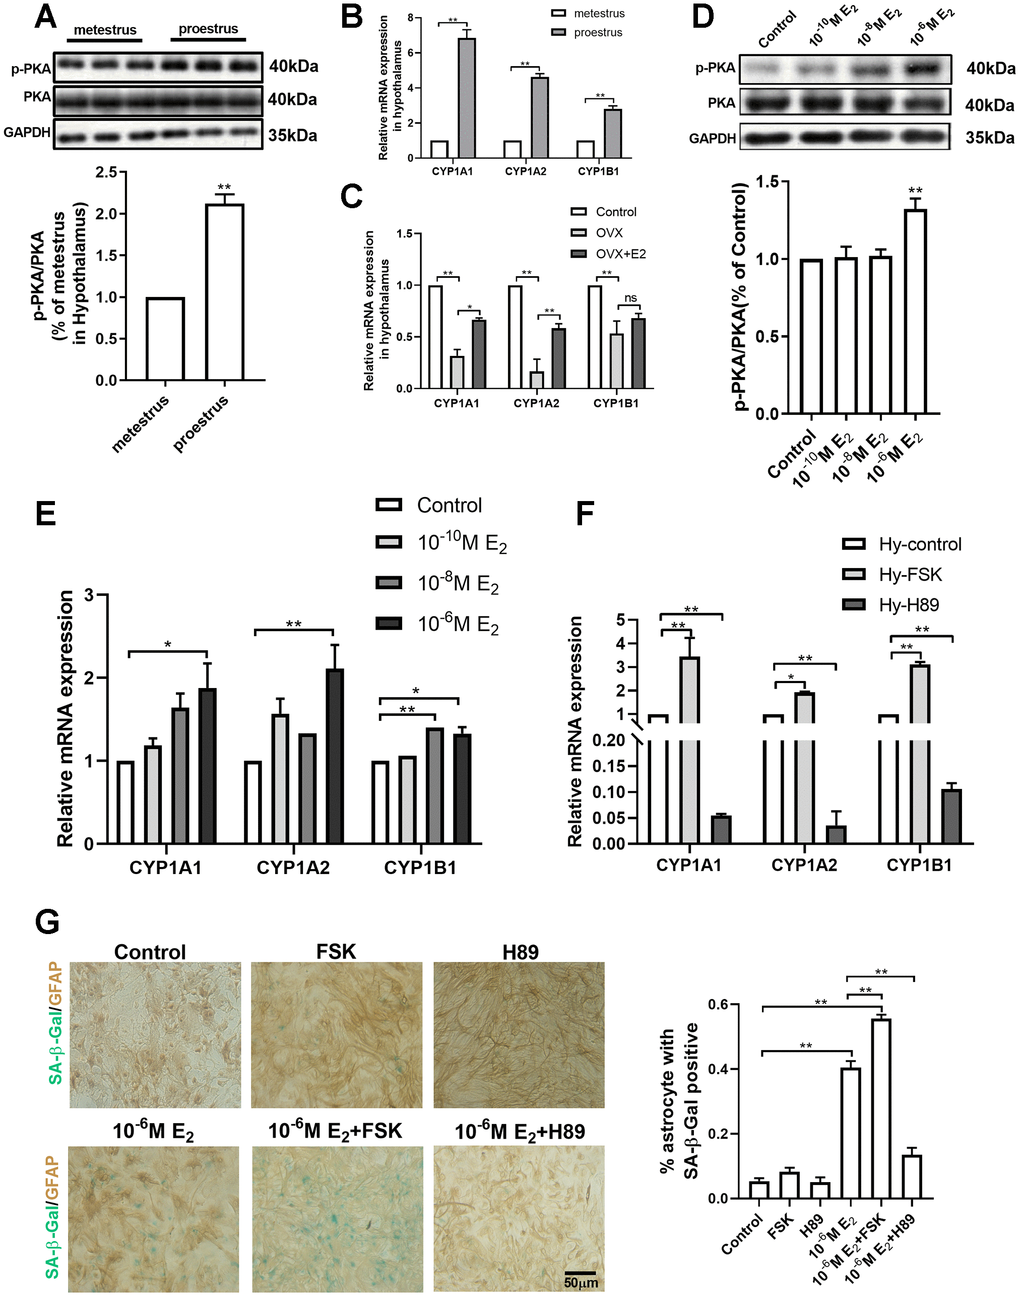 PKA-CYP signaling mediates estradiol-induced senescence of hypothalamic astrocytes. (A) The expression of PKA and p-PKA in hypothalamus during proestrus and metestrus at 3 months of age as determined by Western blotting (n = 6). (B) Effects of estrous cycle on the mRNA expression of CYP1A1, CYP1A2 and CYP1B1 gene in the hypothalamus as determined by qPCR. Metestrus vs. proestrus, n=3 (upper). (C) Effects of estradiol on the mRNA expression of CYP1A1, CYP1A2 and CYP1B1 gene in the hypothalamic tissue as determined by qPCR. OVX group vs. control group, OVX group vs. OVX+E2 group, n=3. The p-value of (A–C) was determined by Student’s t test,*ppD) Expression of PKA and p-PKA in primary cultured hypothalamic astrocytes with the intervention of different estradiol concentrations as determined by Western blotting (n = 5). (E) Effects of estradiol on the mRNA expression of CYP1A1, CYP1A2 and CYP1B1 gene in primary cultured hypothalamic astrocytes with the intervention of different estradiol concentrations, as compared with the control, n= 3. (F) Effects of PKA activator (Forskolin, 10μM, 24h) and inhibitor (H89, 30μM, 24h) on the mRNA expression of CYP1A1, CYP1A2 and CYP1B1 gene in the primary cultured hypothalamic astrocytes, as compared with the control, n=3. (G) Dual-label immunohistochemistry showing astrocytes (brown) and SA-β-Gal staining (blue) with the effects of 10-6M estradiol, together with Forskolin and H89, respectively. Black arrows represent SA-β-Gal –positive astrocytes. n=3, scale bar=50μm. The p-value was determined by One-way ANOVA:*pp